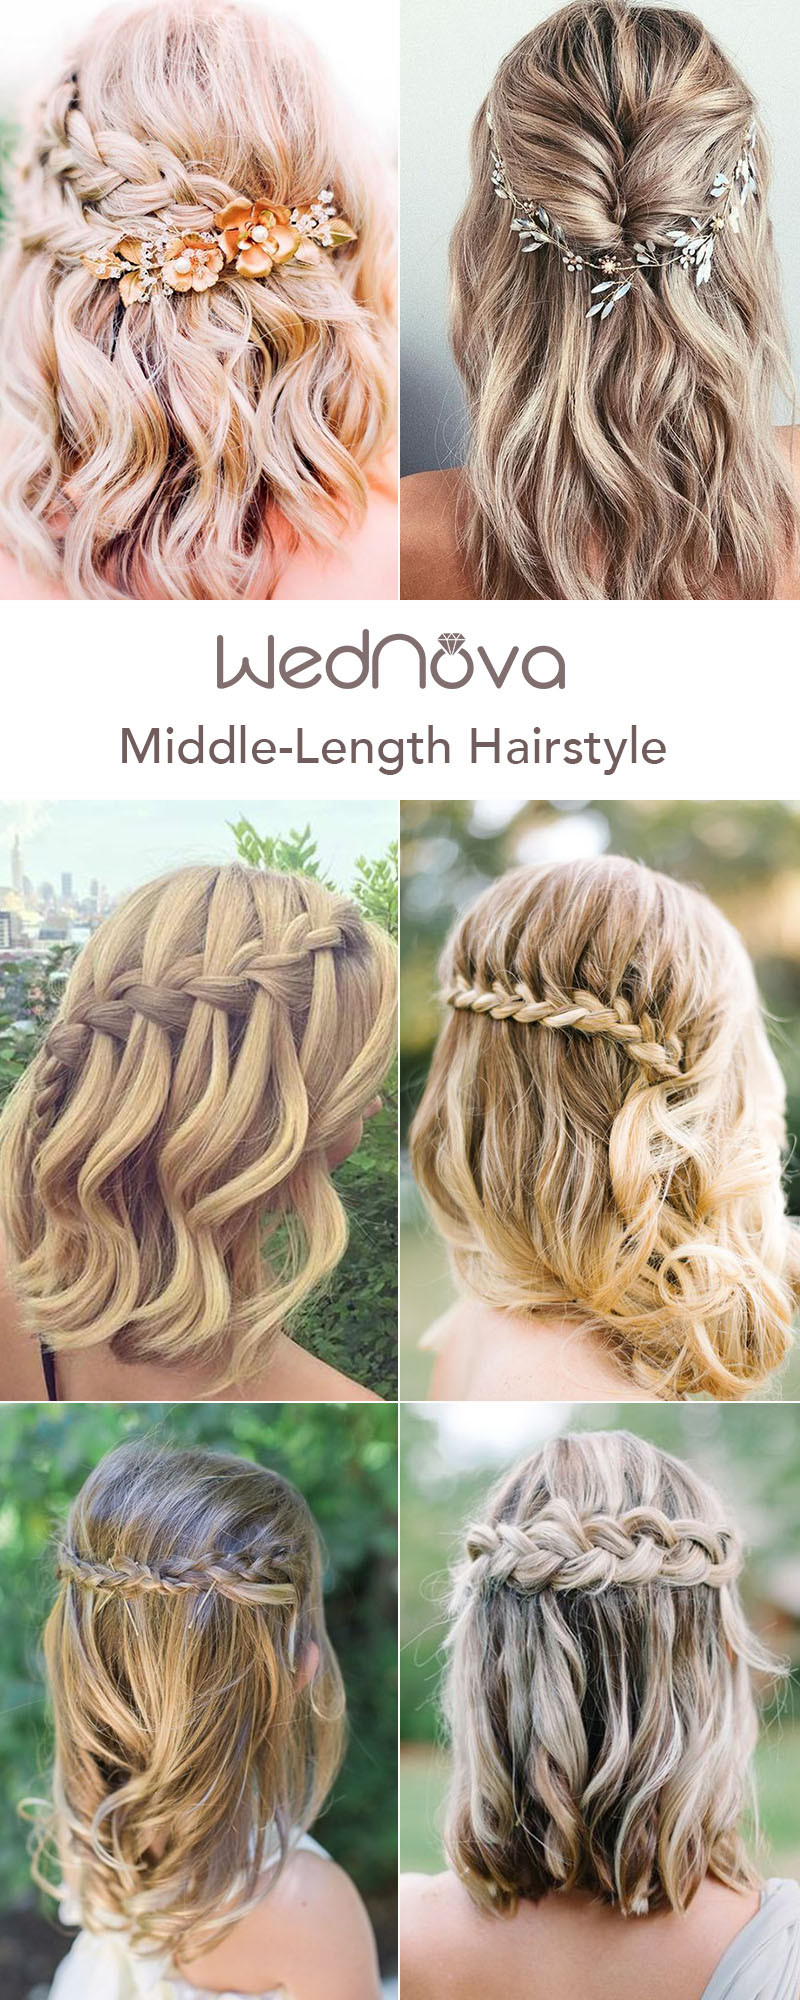 Medium Hair Bridesmaid Hairstyles
 48 Easy Wedding Hairstyles Best Guide for Your Bridesmaids